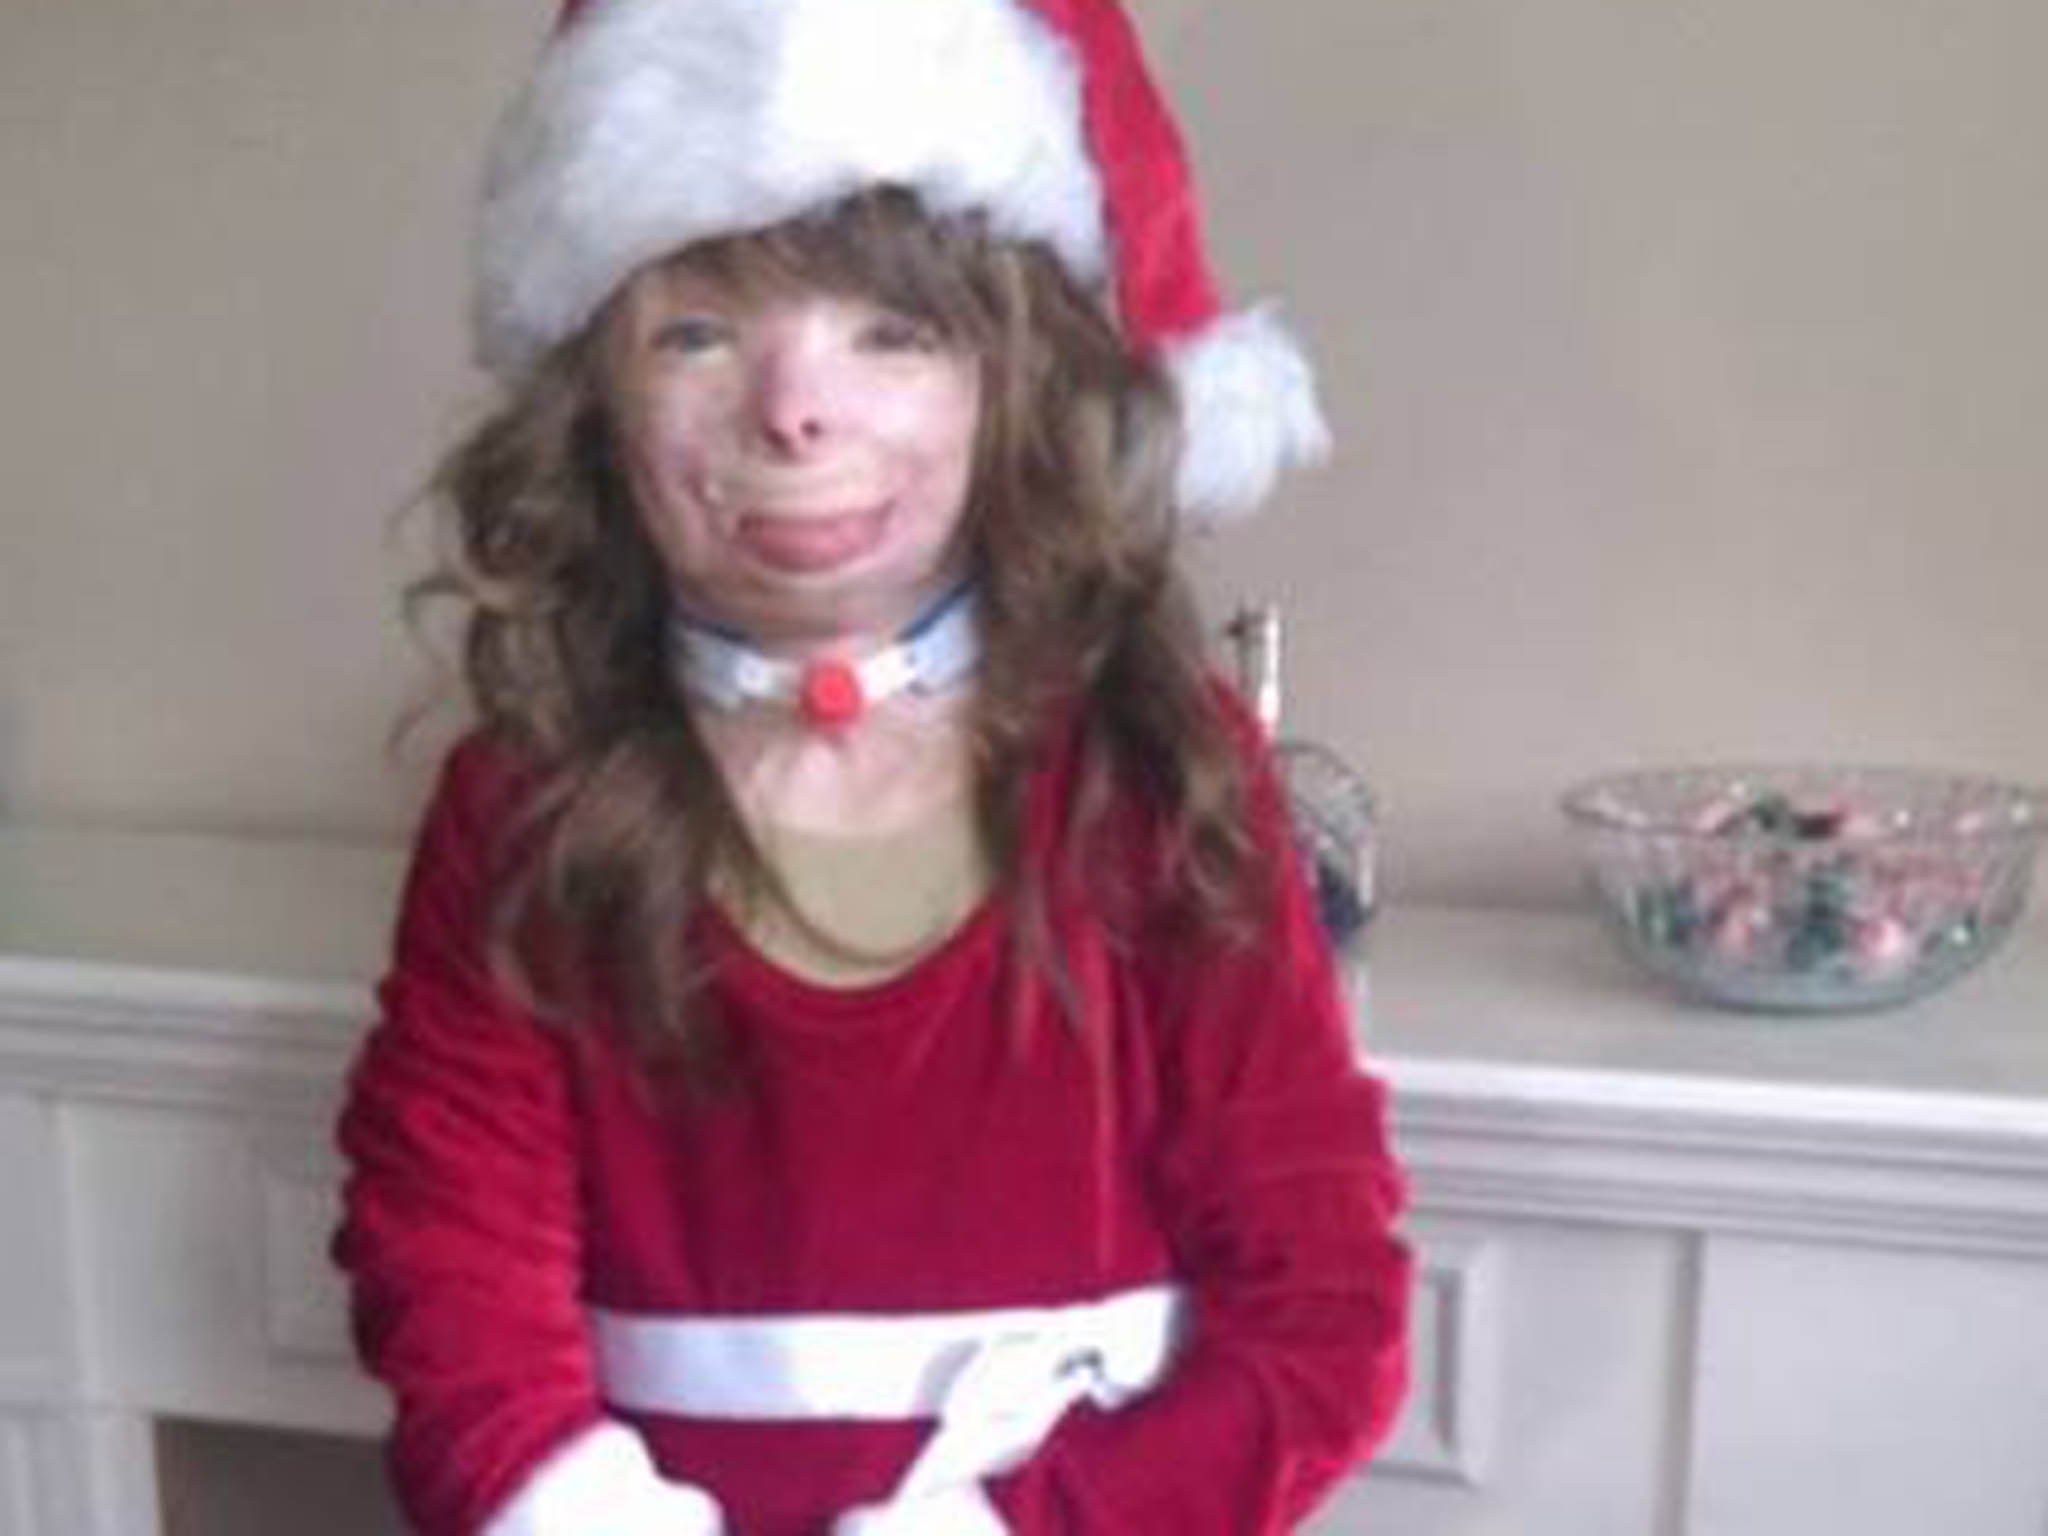 Arson survivor Safyre Terry, who lost father, sister and 